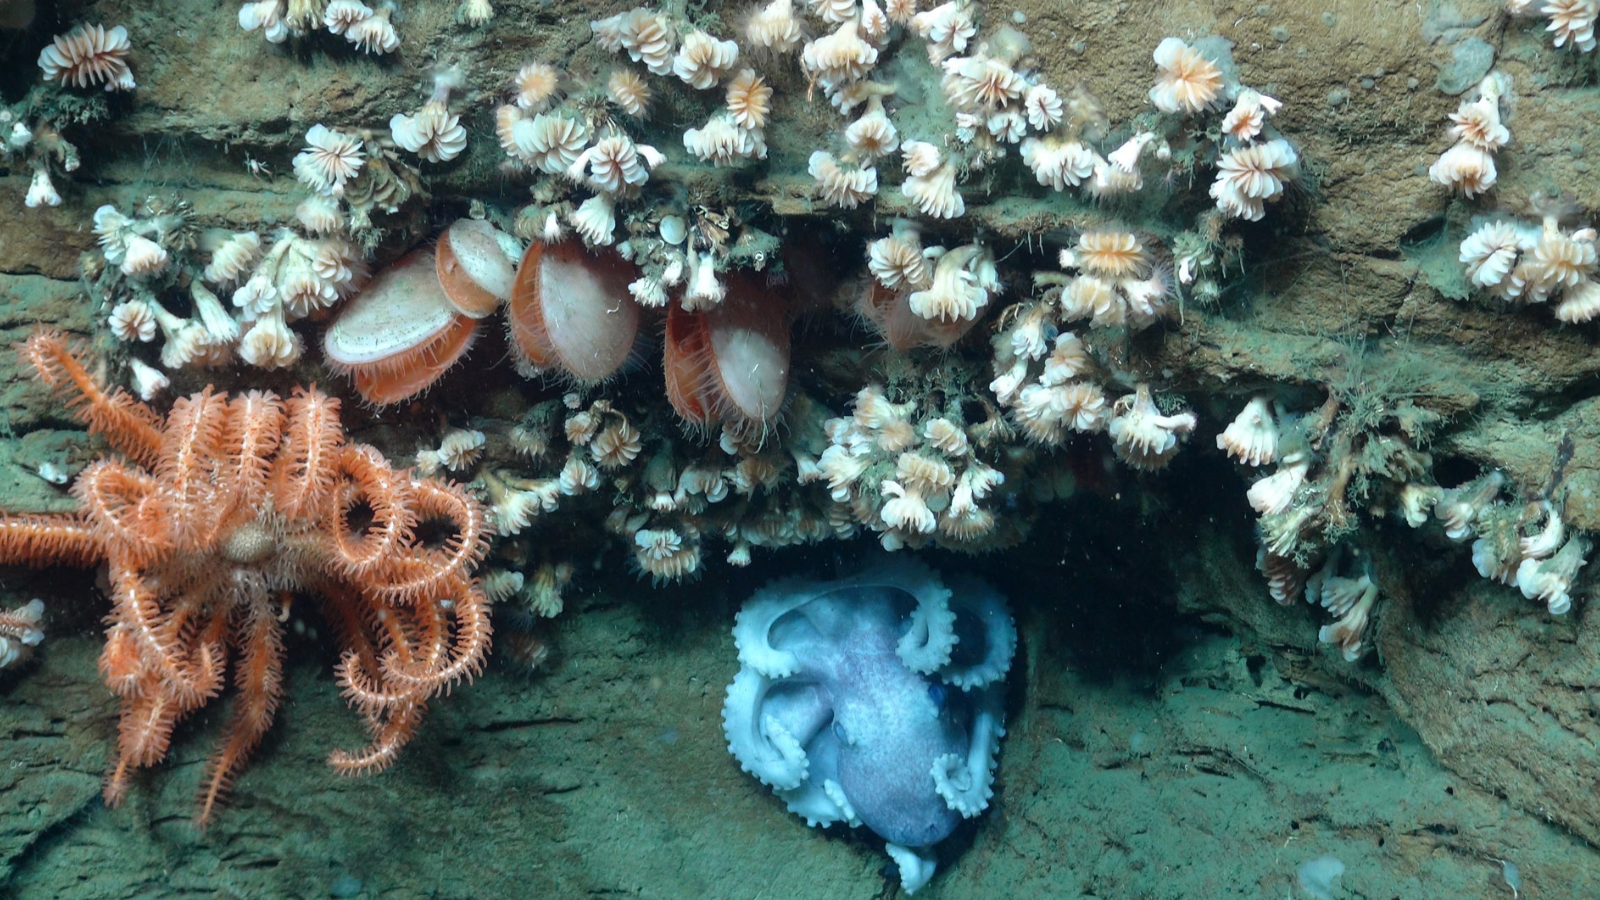 An octopus, sea star, bivalves, and dozens of cup coral all share the same overhang.